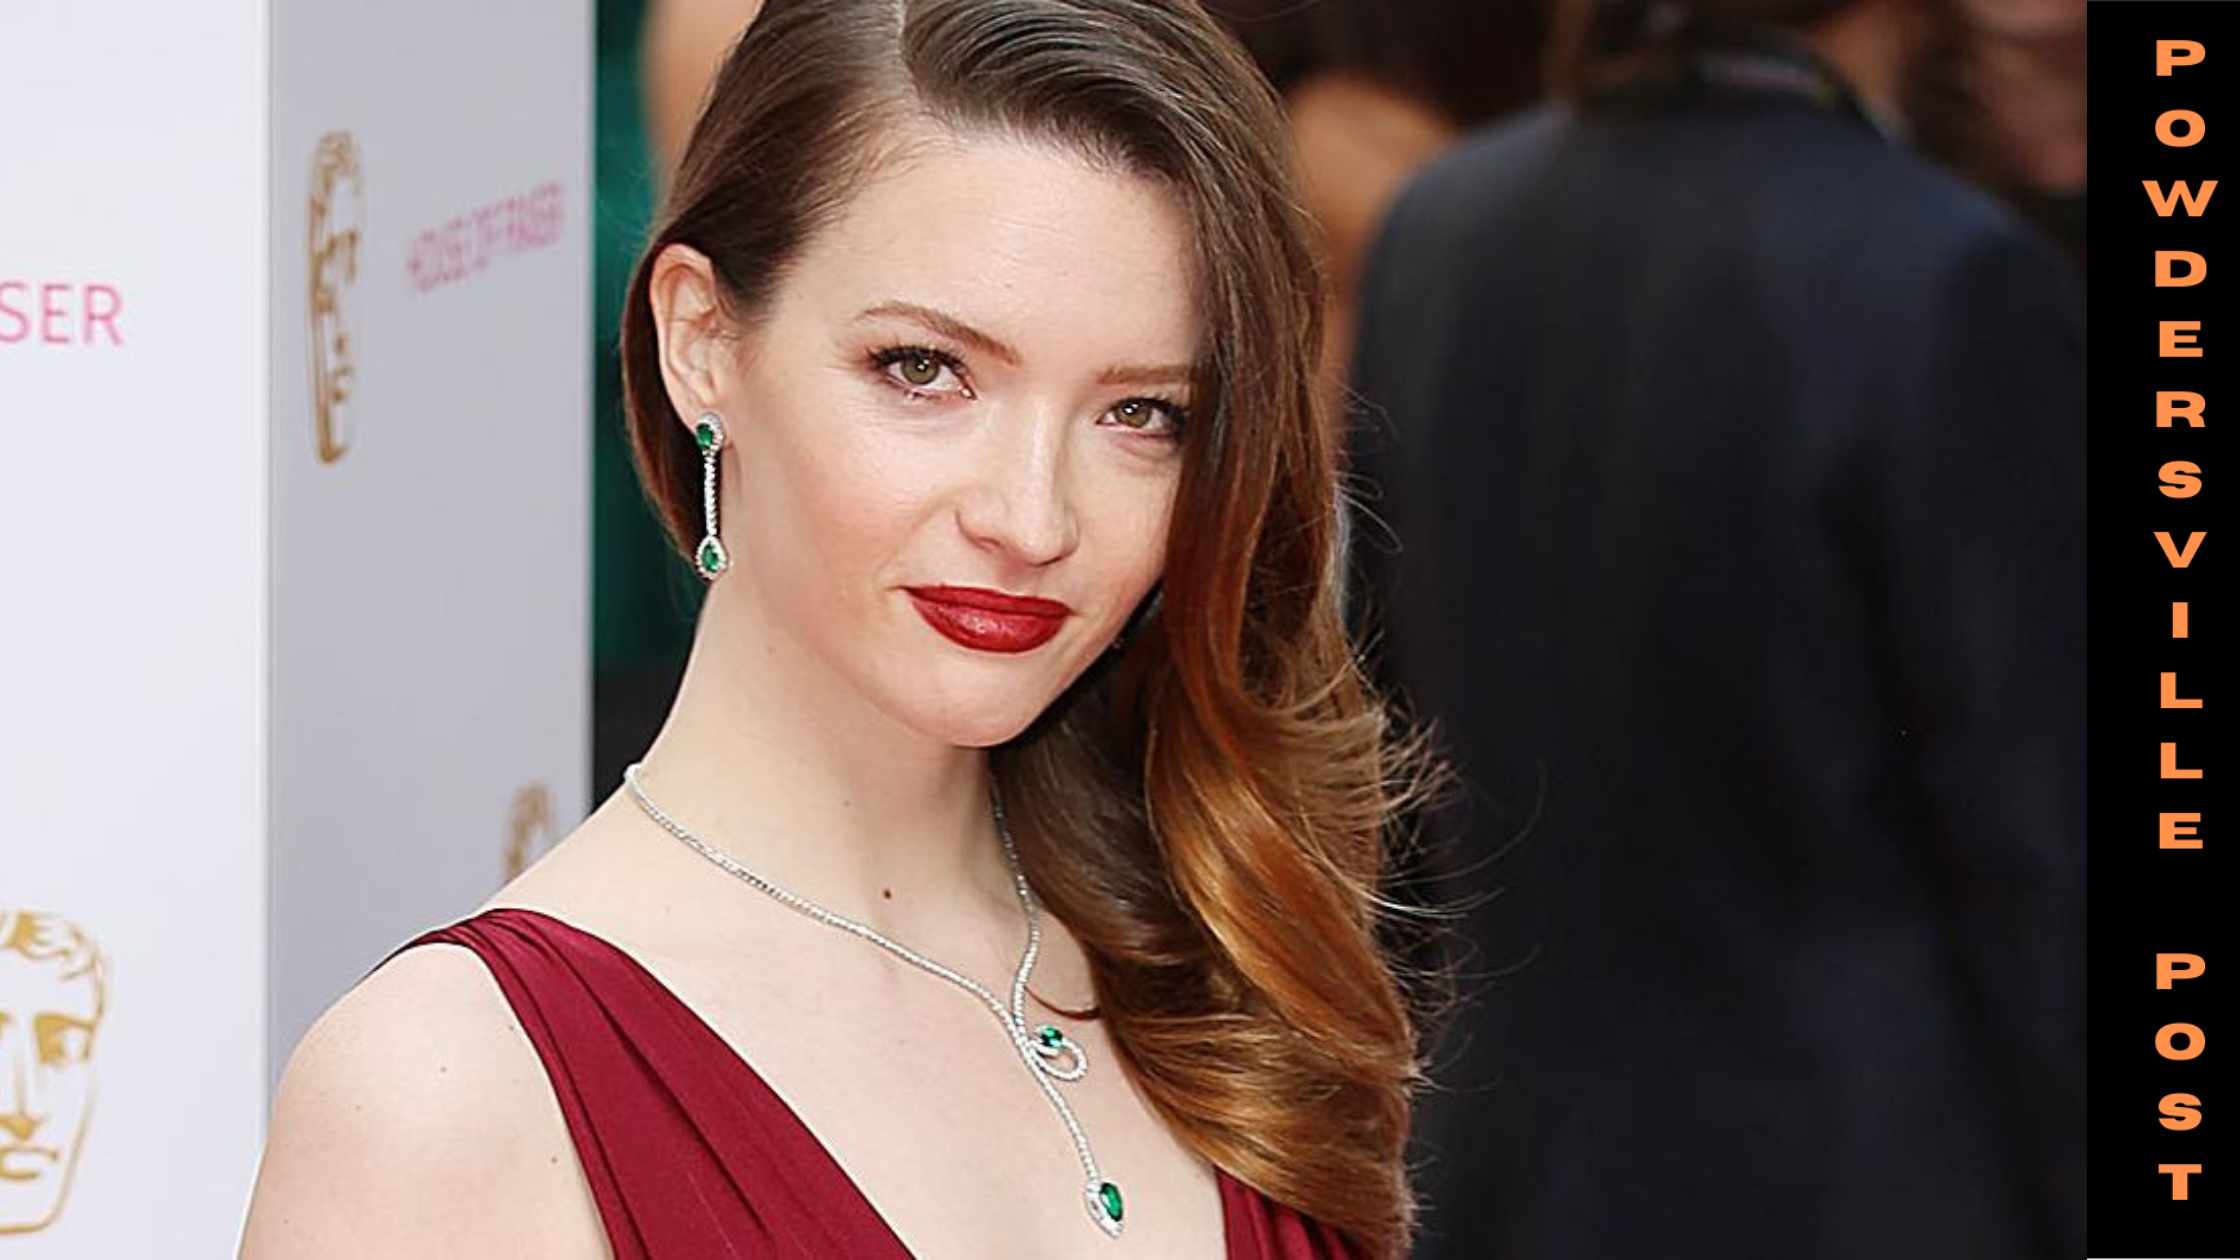 Lesser Known Facts About Elon Musk Ex-Wife Talulah Riley Bio, Net Worth, Career, Marriage, Dating, Boyfriend, And More